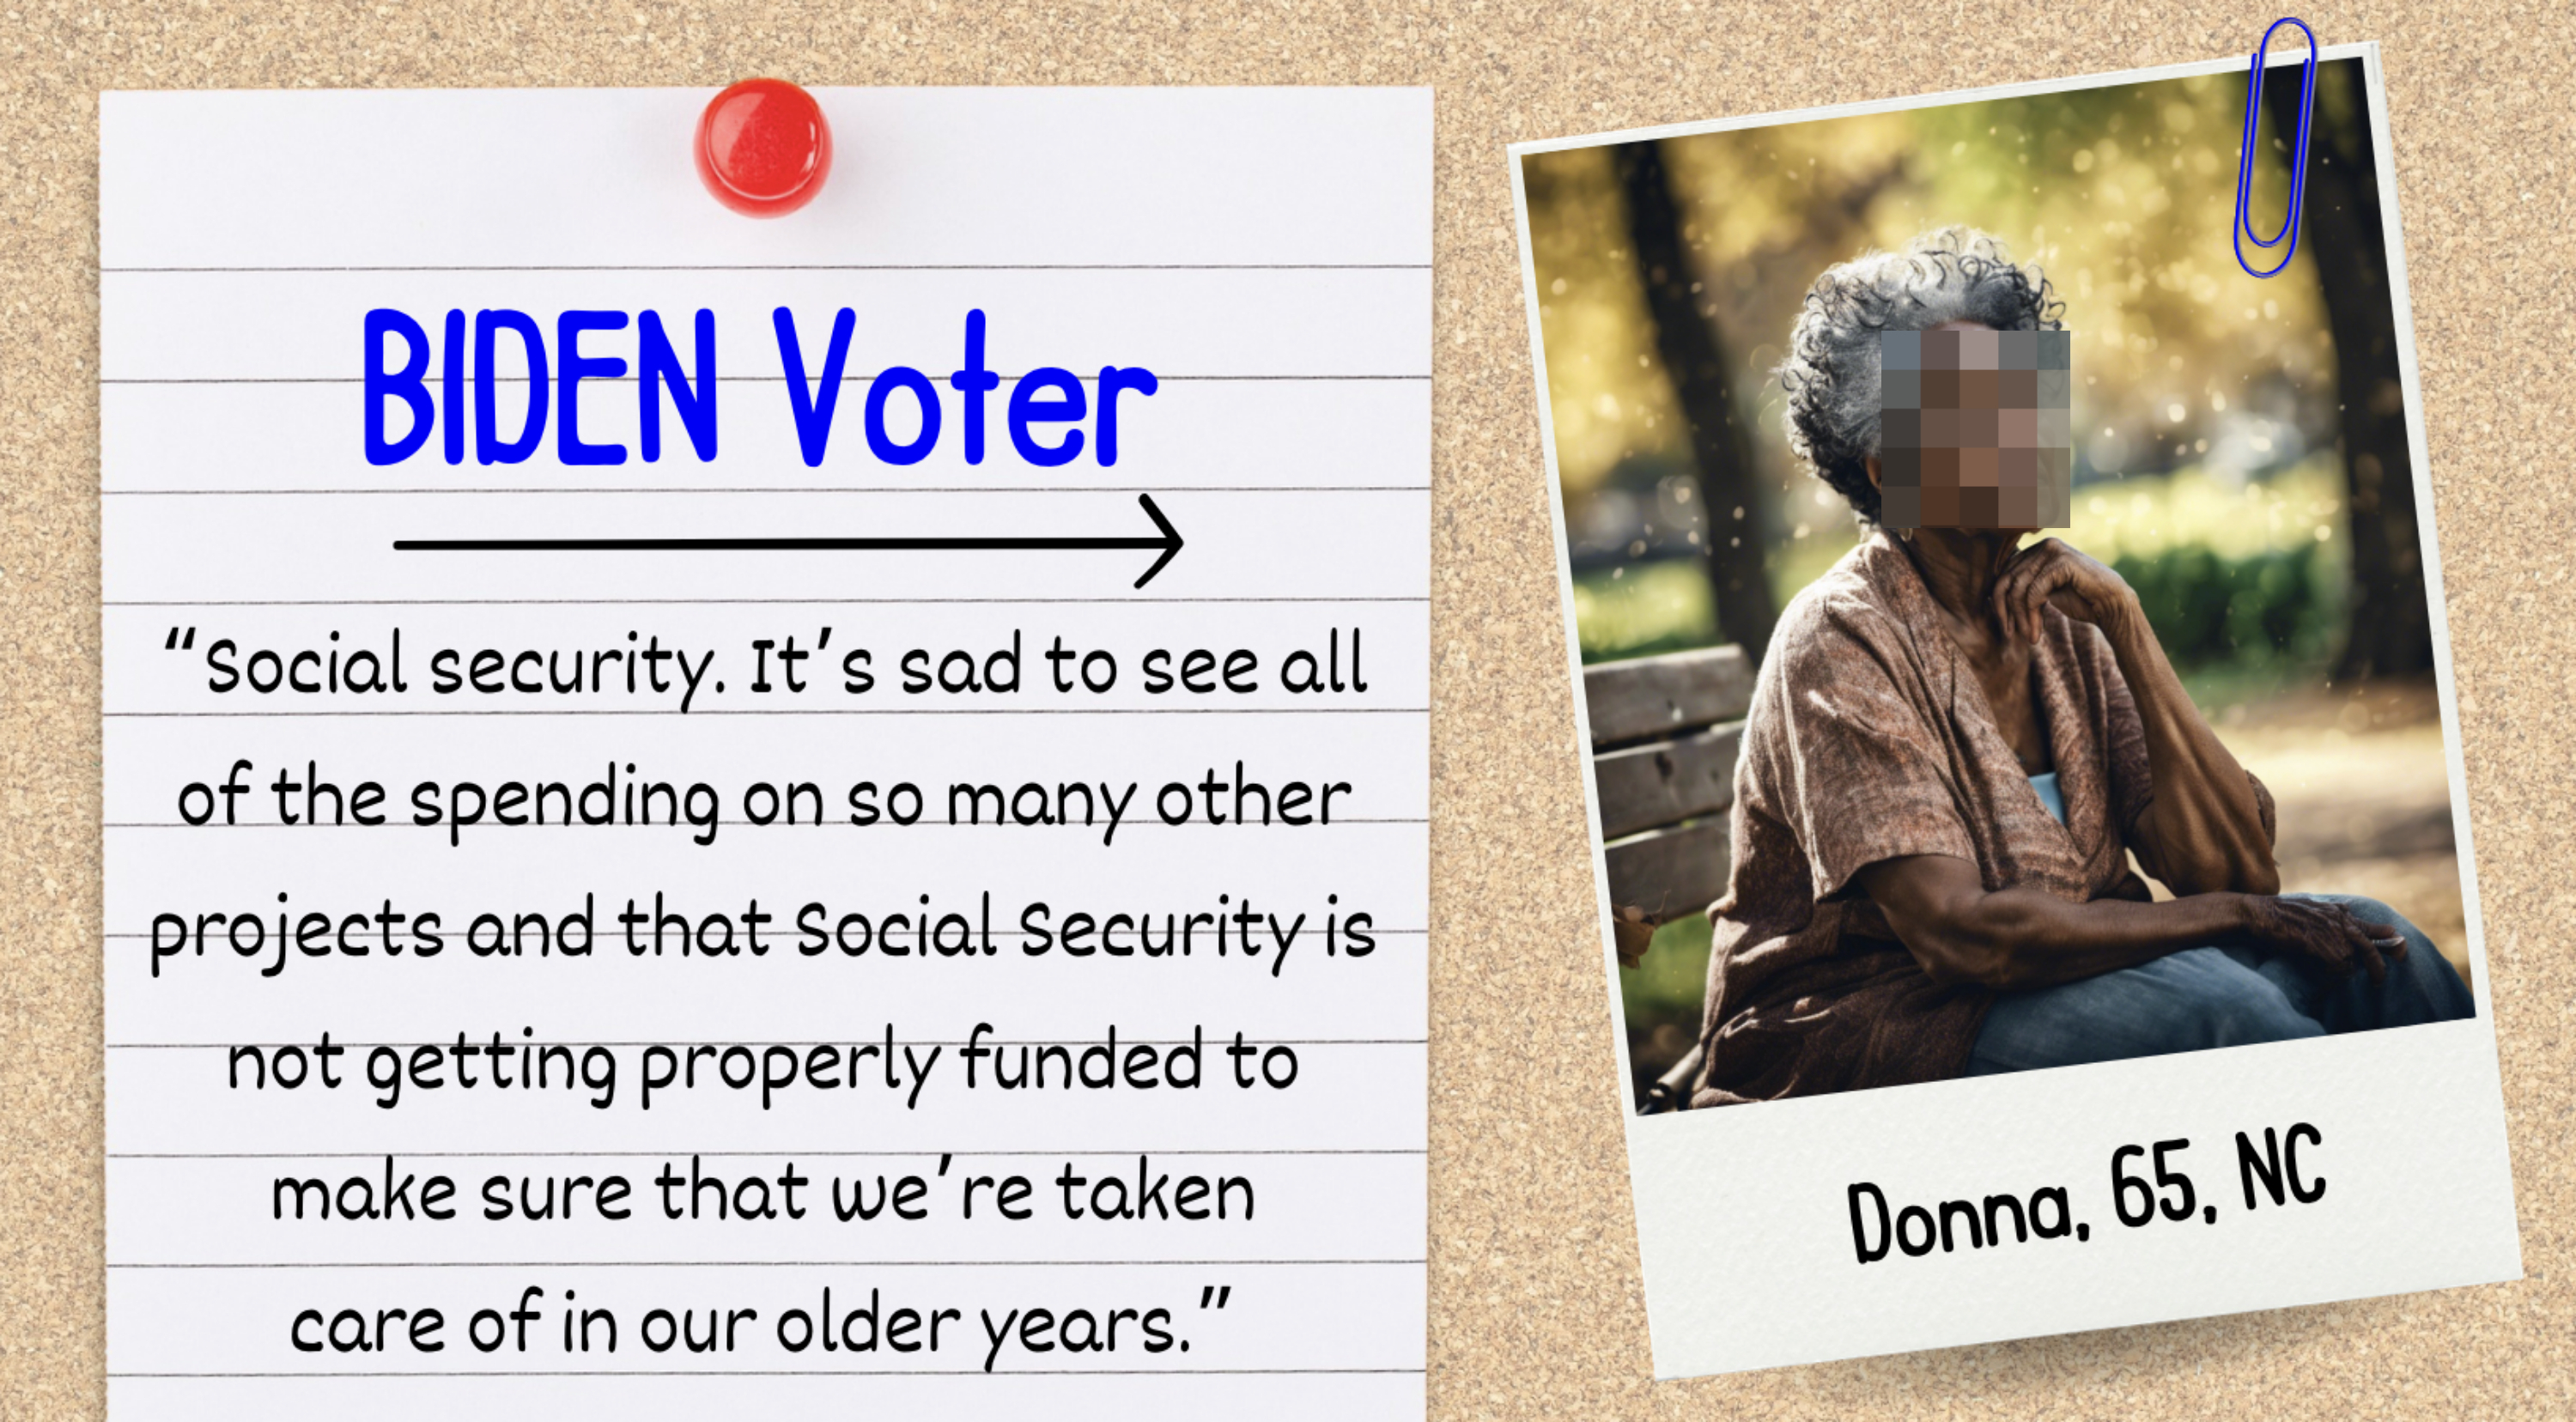 Note pinned to a board reading &quot;BIDEN Voter&quot;, alongside a quote about social security concerns, next to a photo of Donna, 65, from NC, looking contemplative